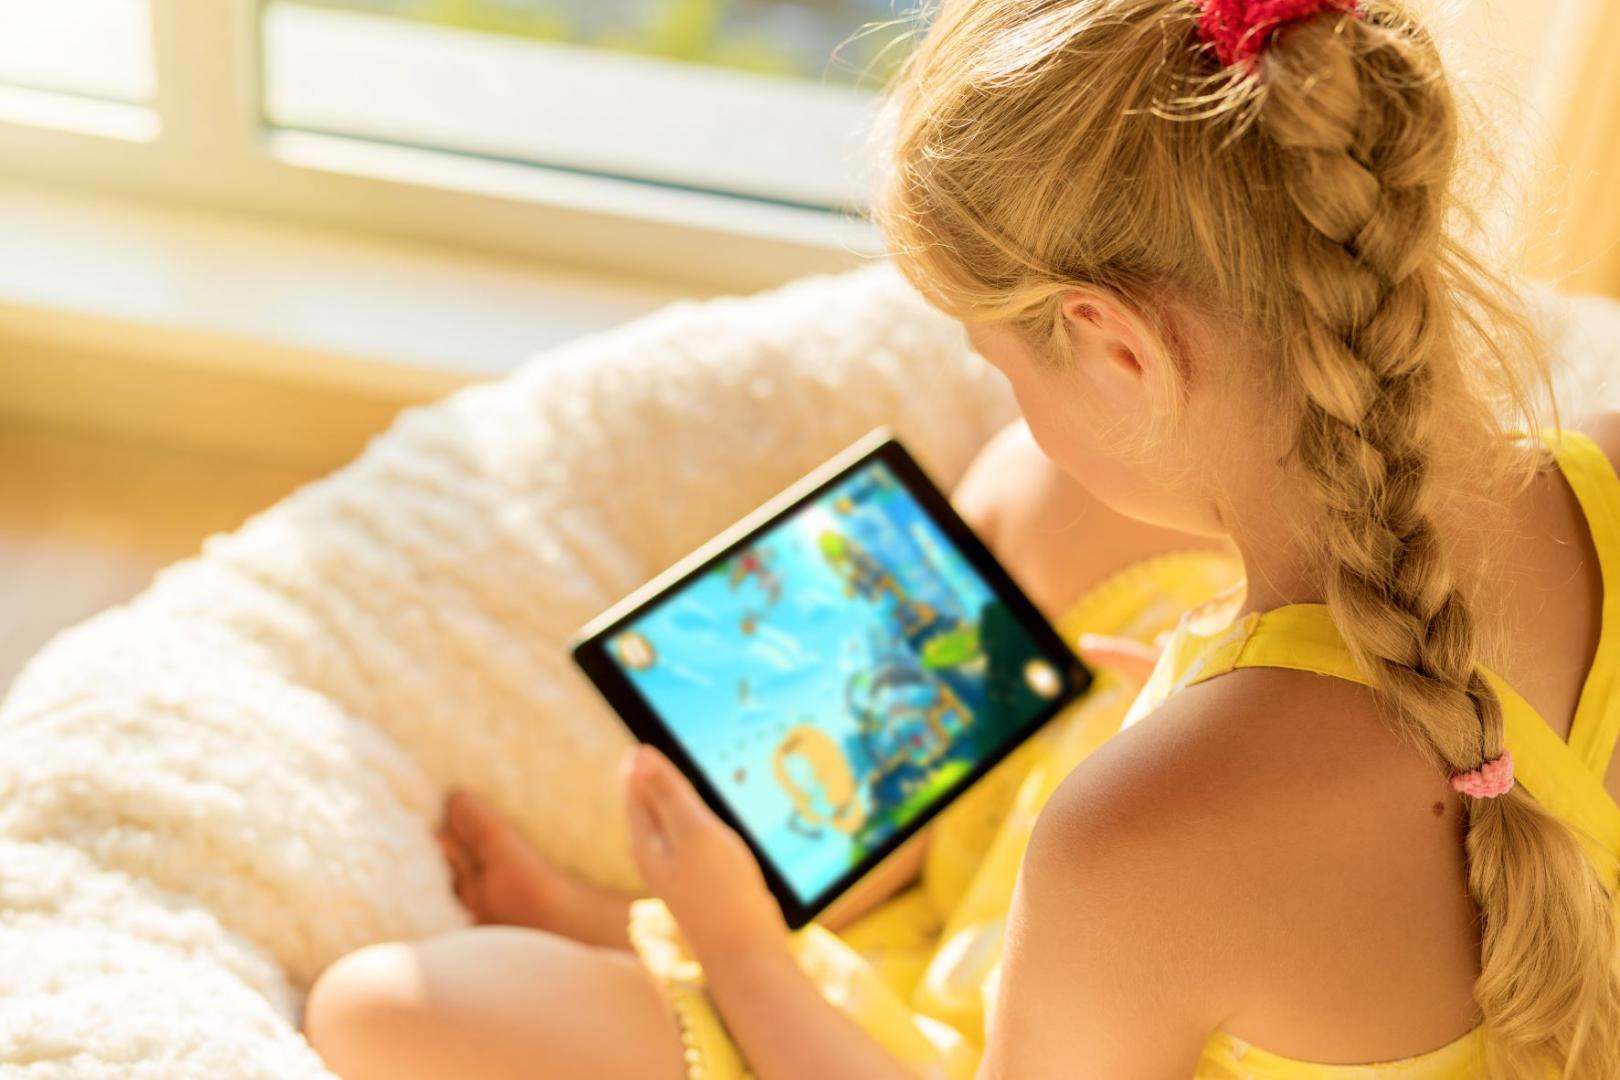 A child plays a mobile game on the tablet